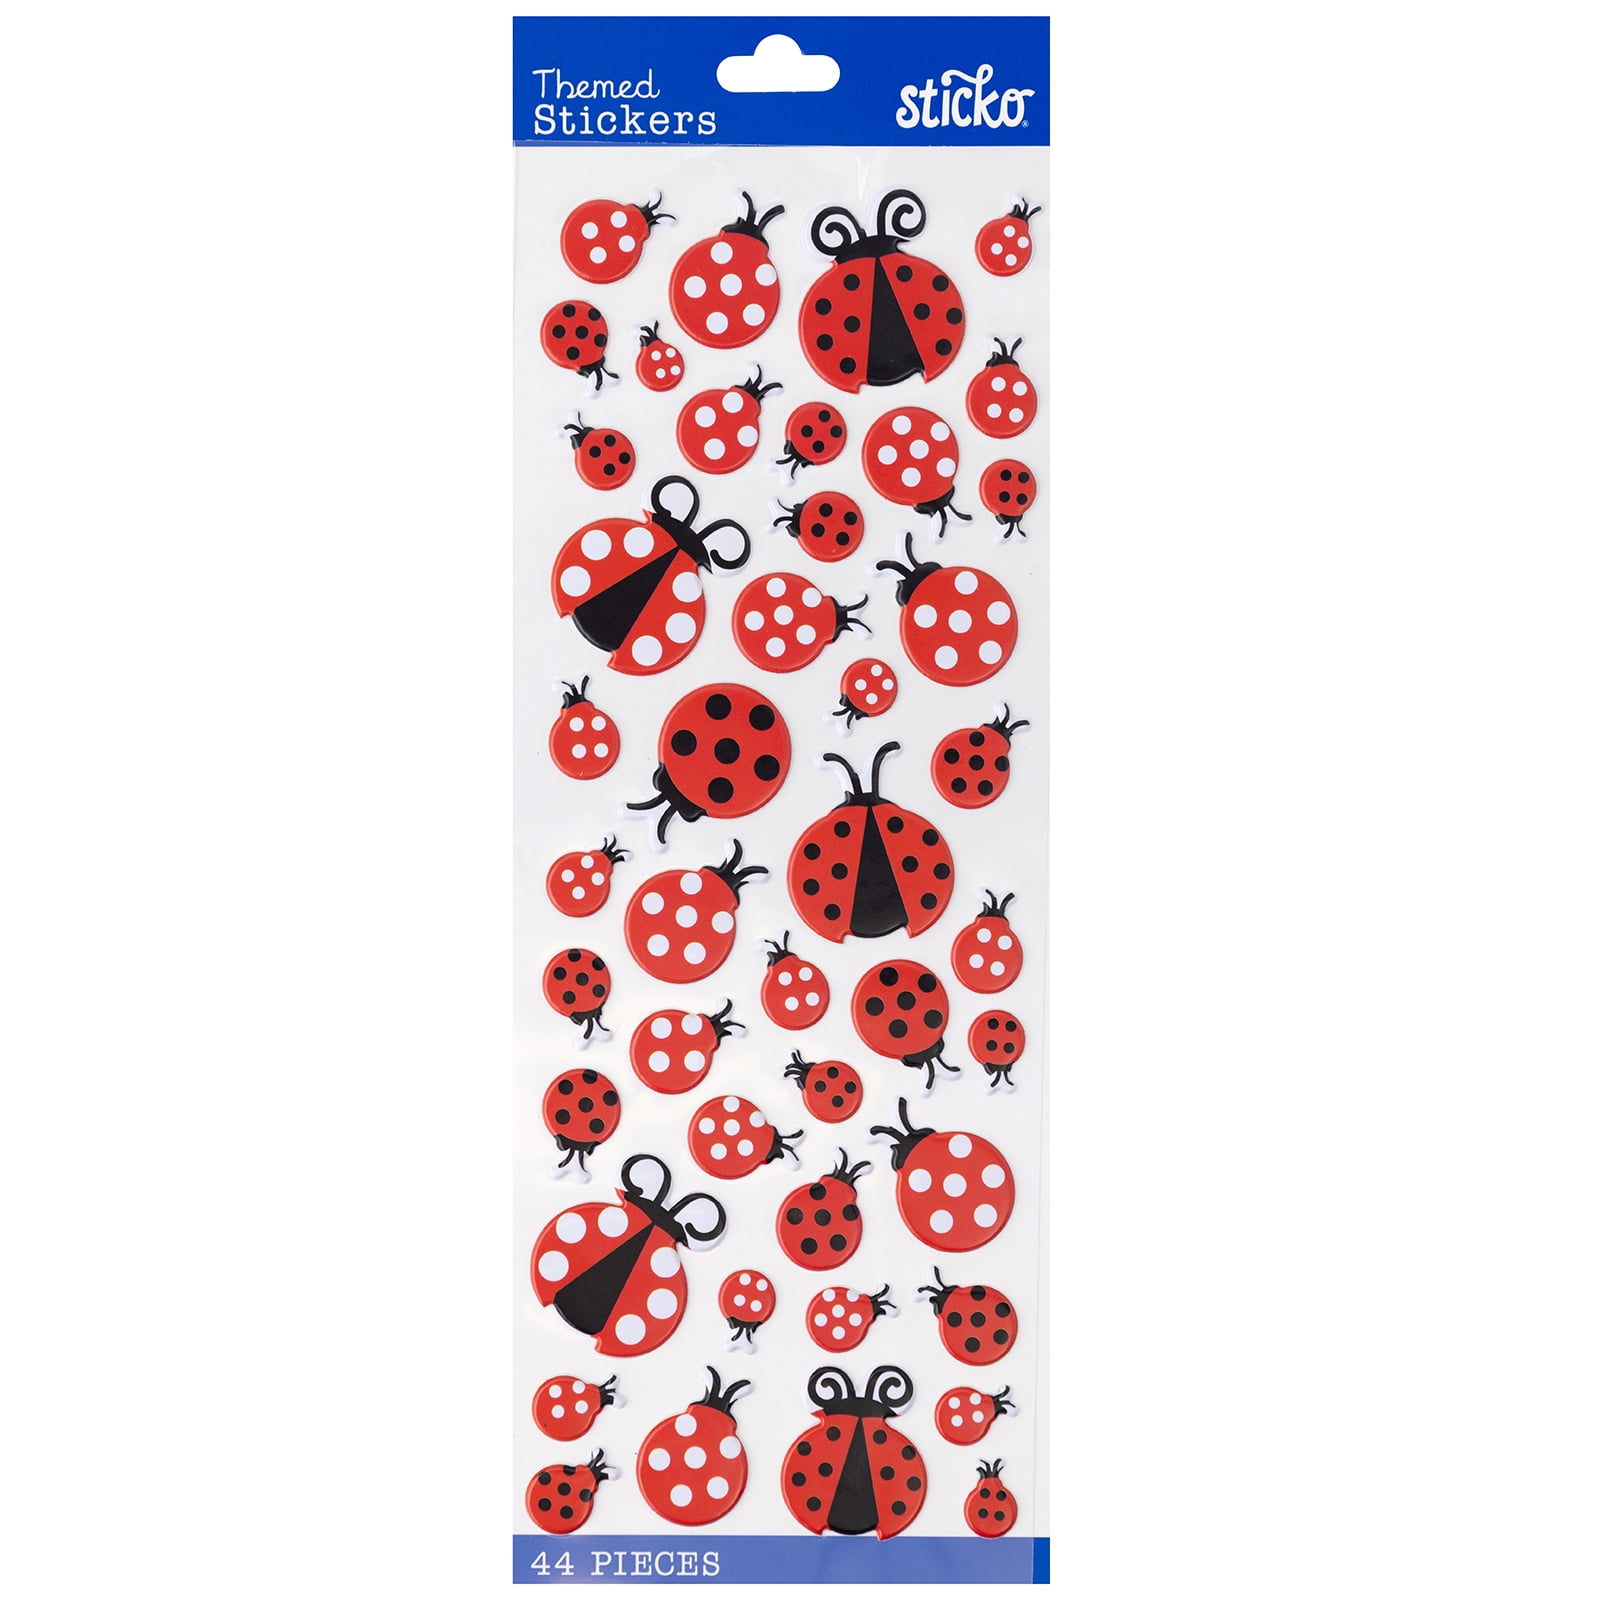 500pcs/roll Cute Cartoon Ladybug Stickers, 1 Inch Round Label Stickers With  10 Different Patterns, For Scrapbooking, Self-sealing Card Envelope, Kids  Gift, Teenagers Party Supplies, Reward And Motivation